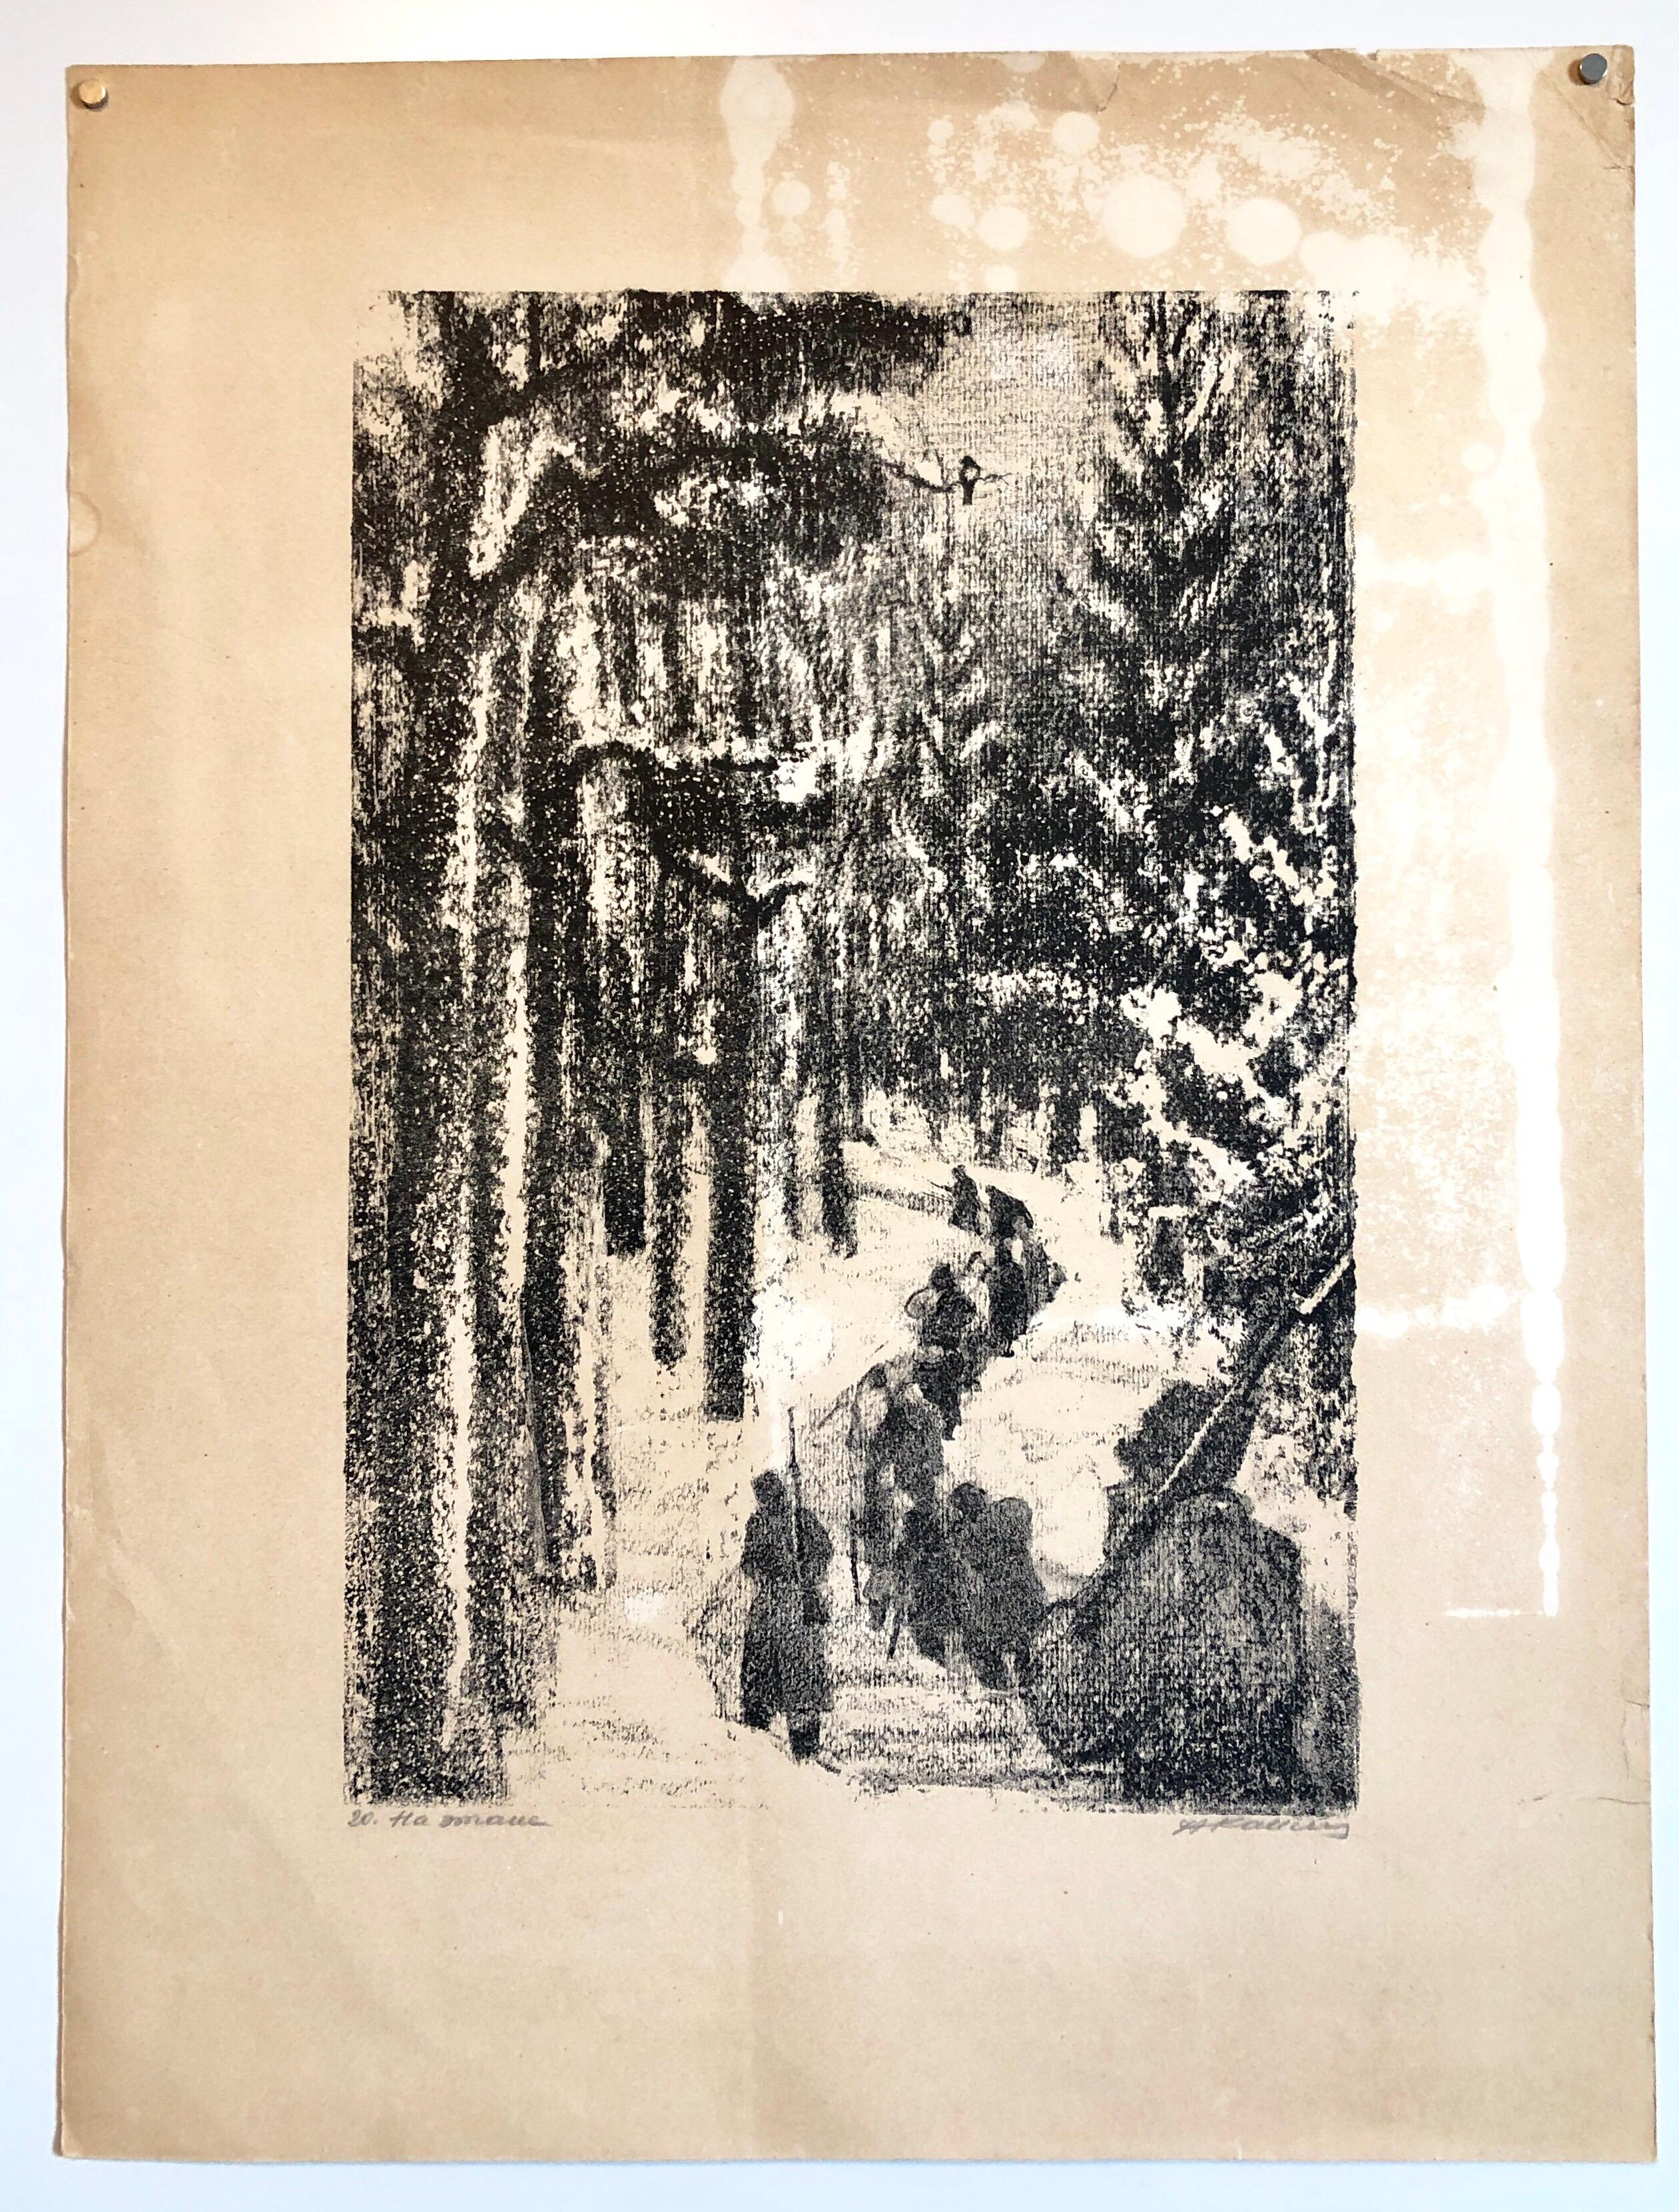 Pencil signed and dated, Russian Soviet Judaica Lithograph.

Anatoli Lwowitch Kaplan was a Russian painter, sculptor and printmaker, whose works often reflect his Jewish origins.
His father was a butcher in Rahachow which was at that time within the